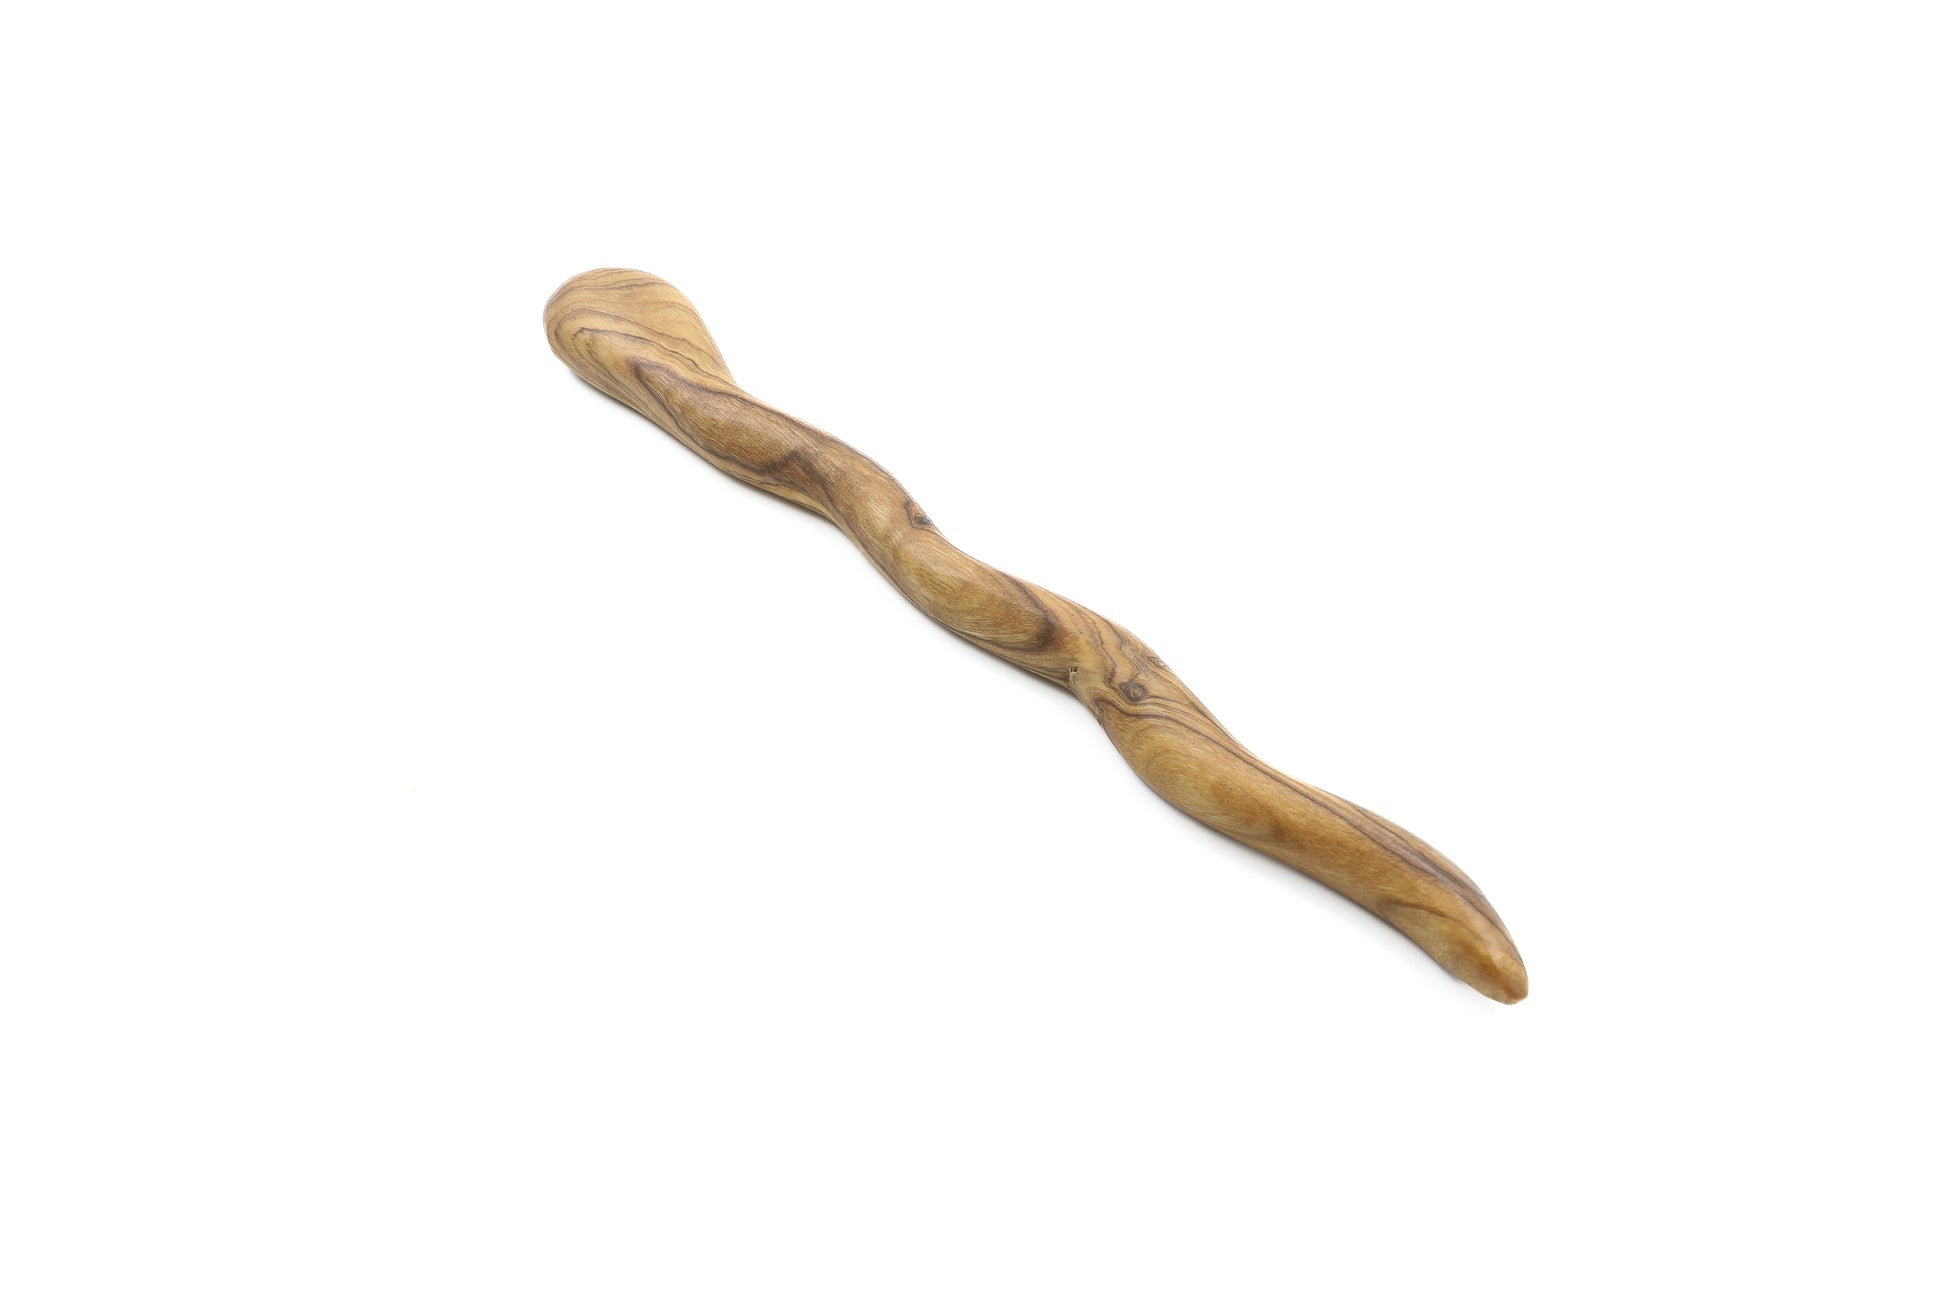 Unique olive wood accessory for styling your hair naturally